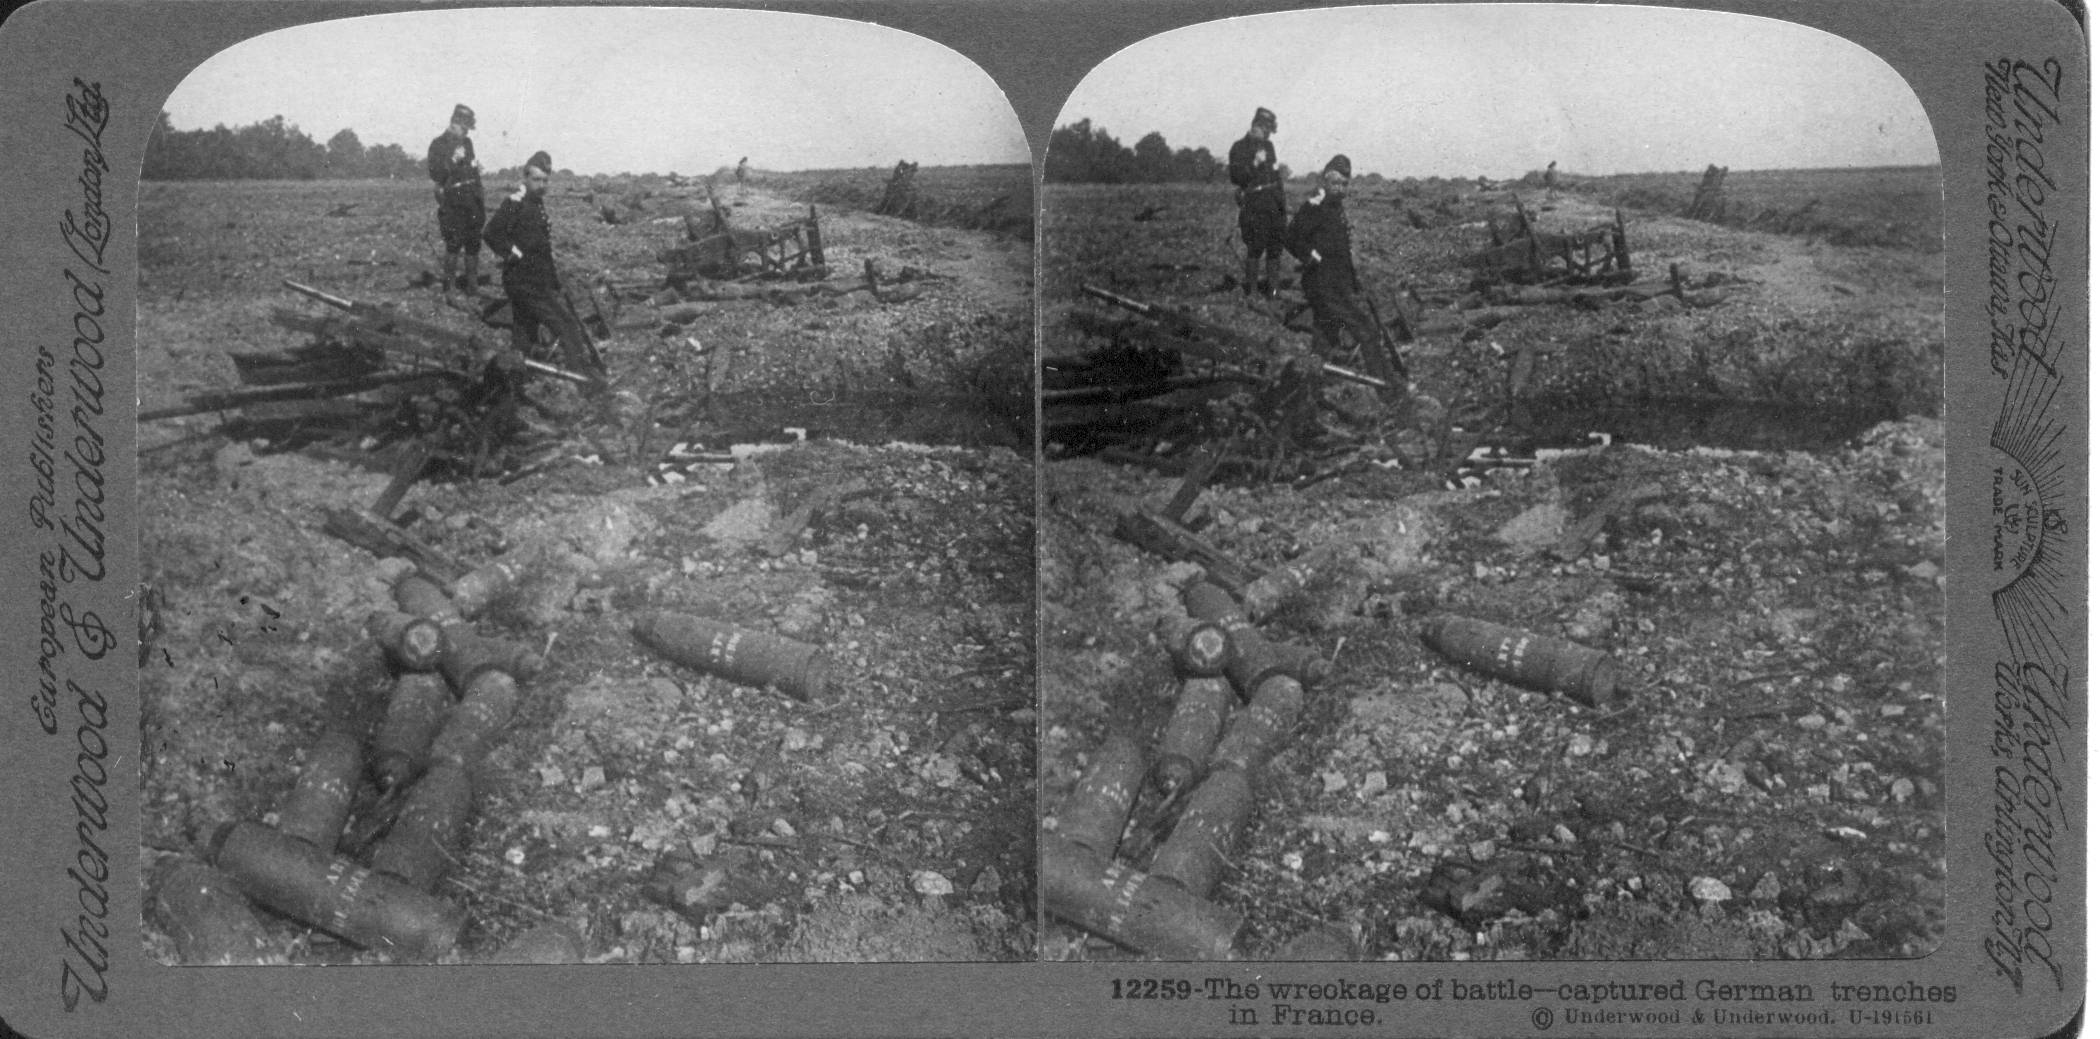 The wreckage of battle--captured German trenches in France